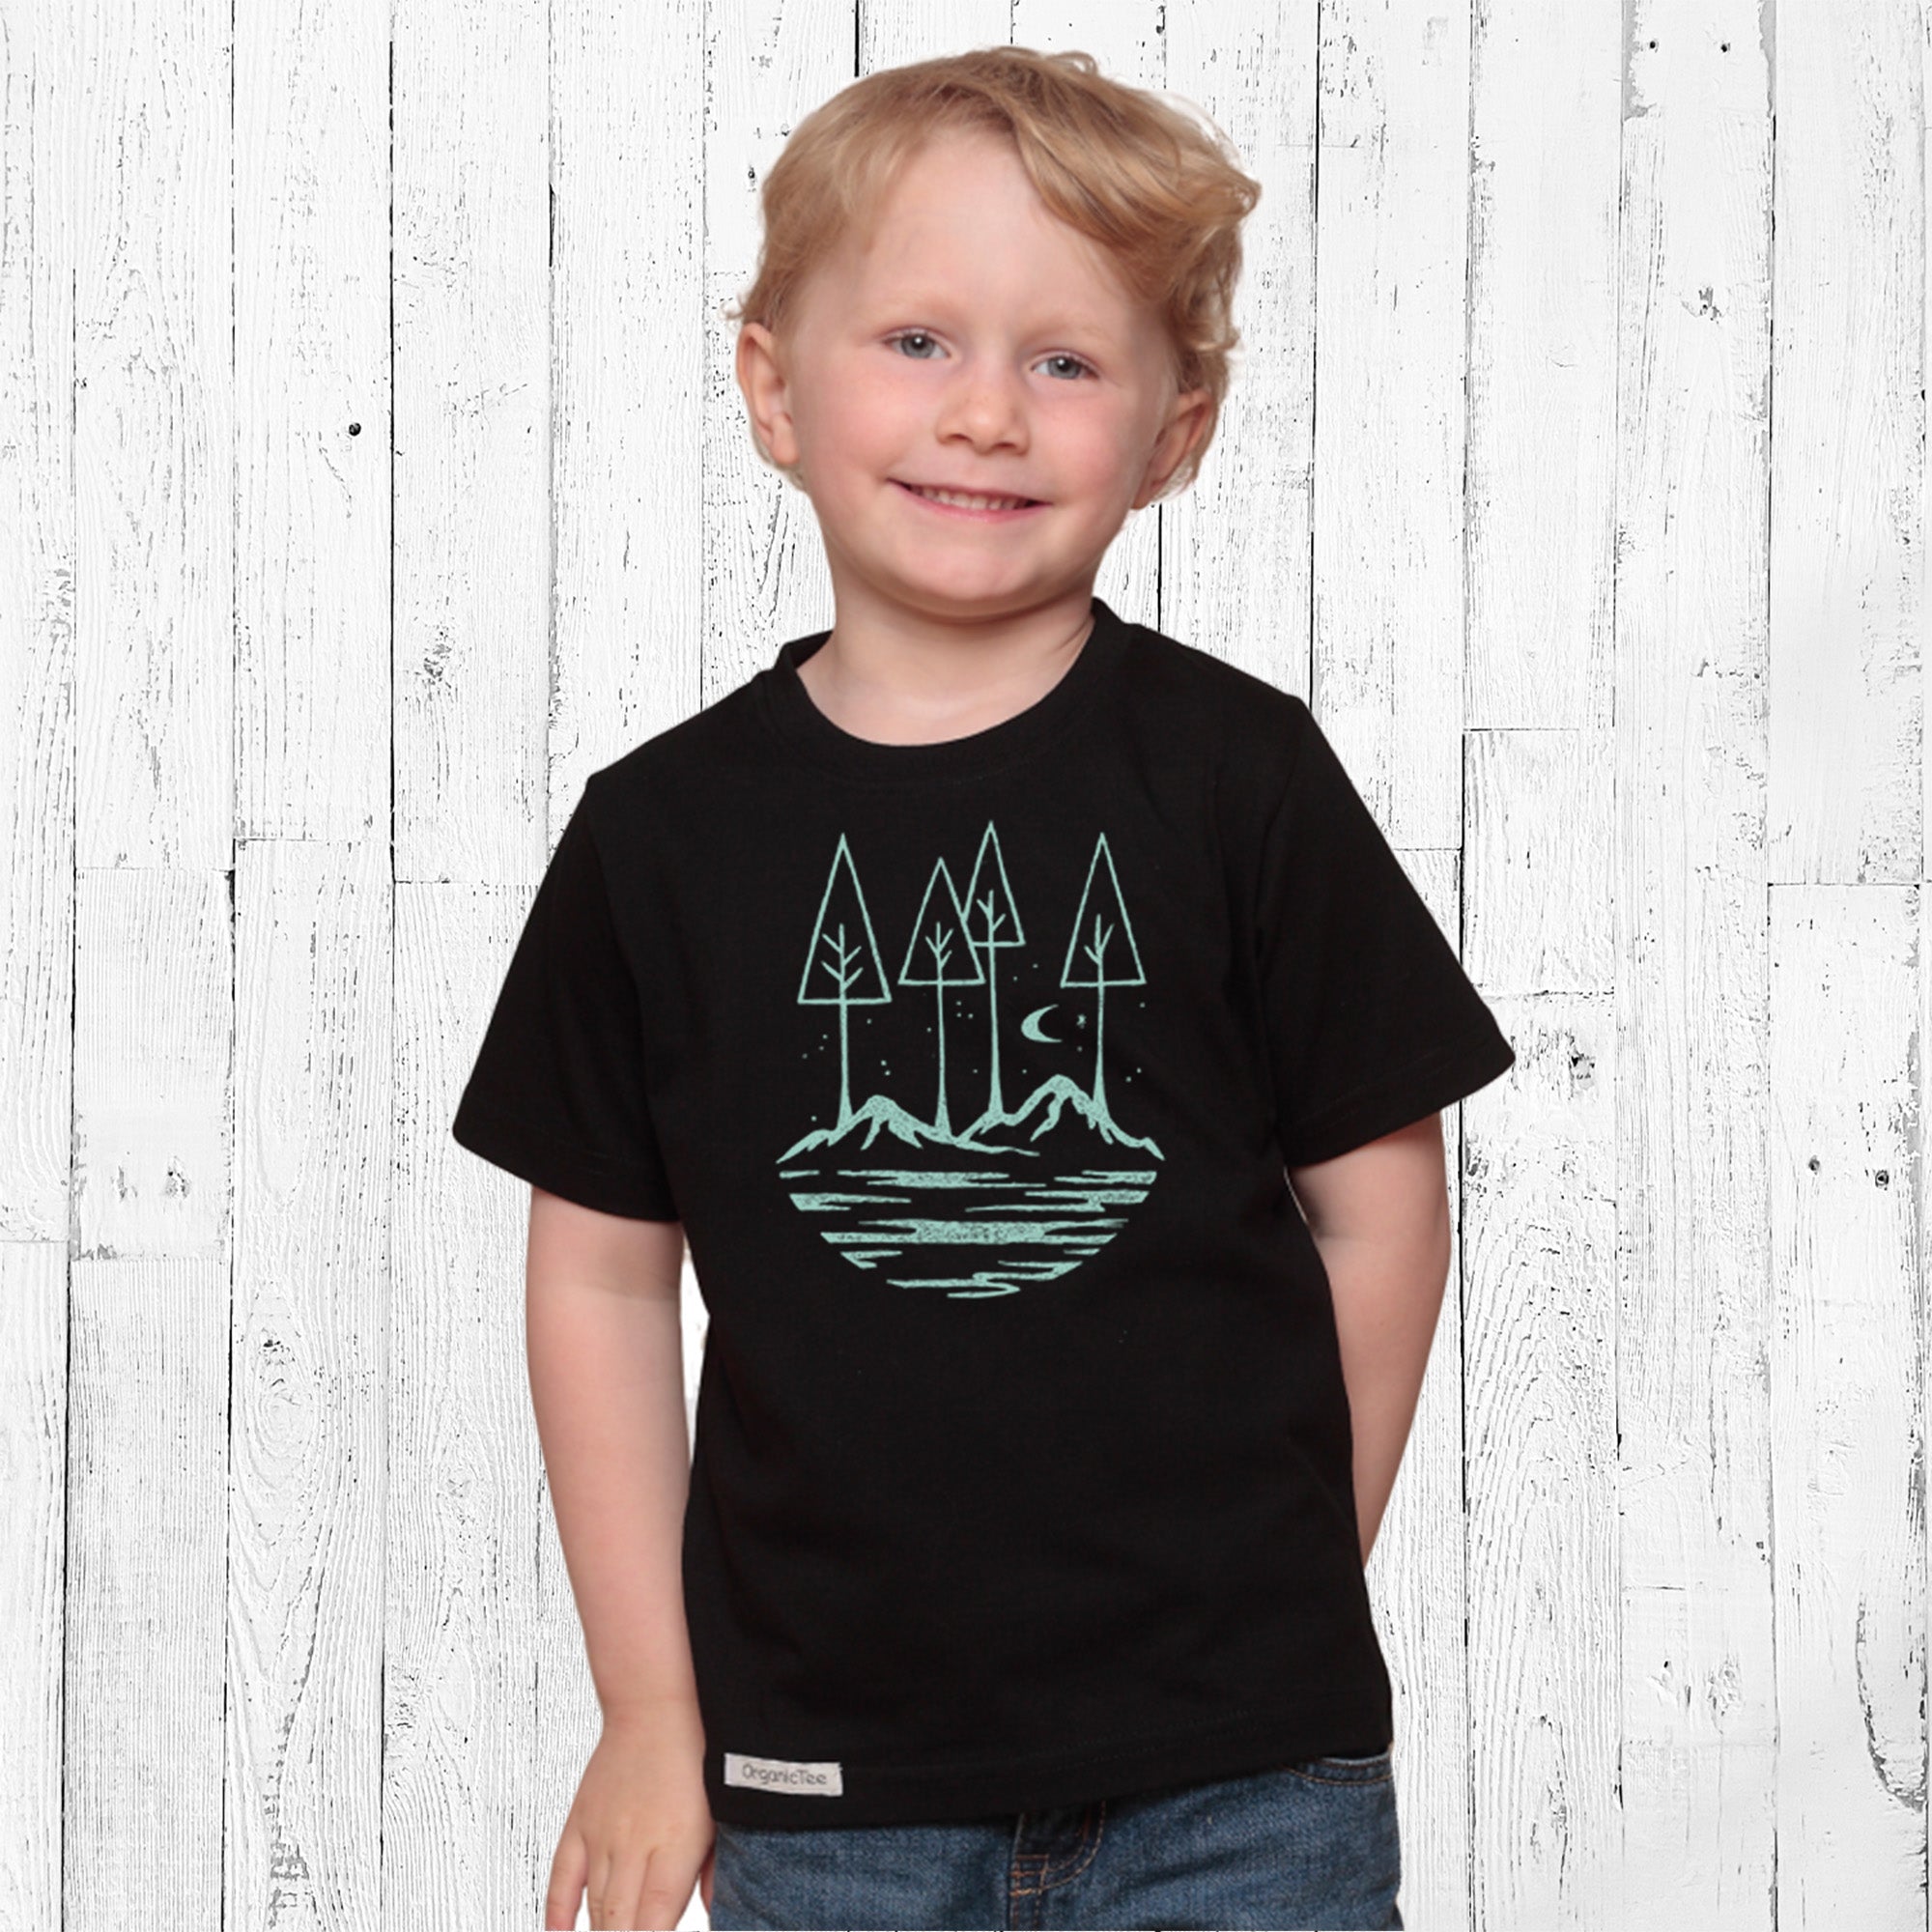 All the Good Things in Life T-shirt for Kids Uni-T